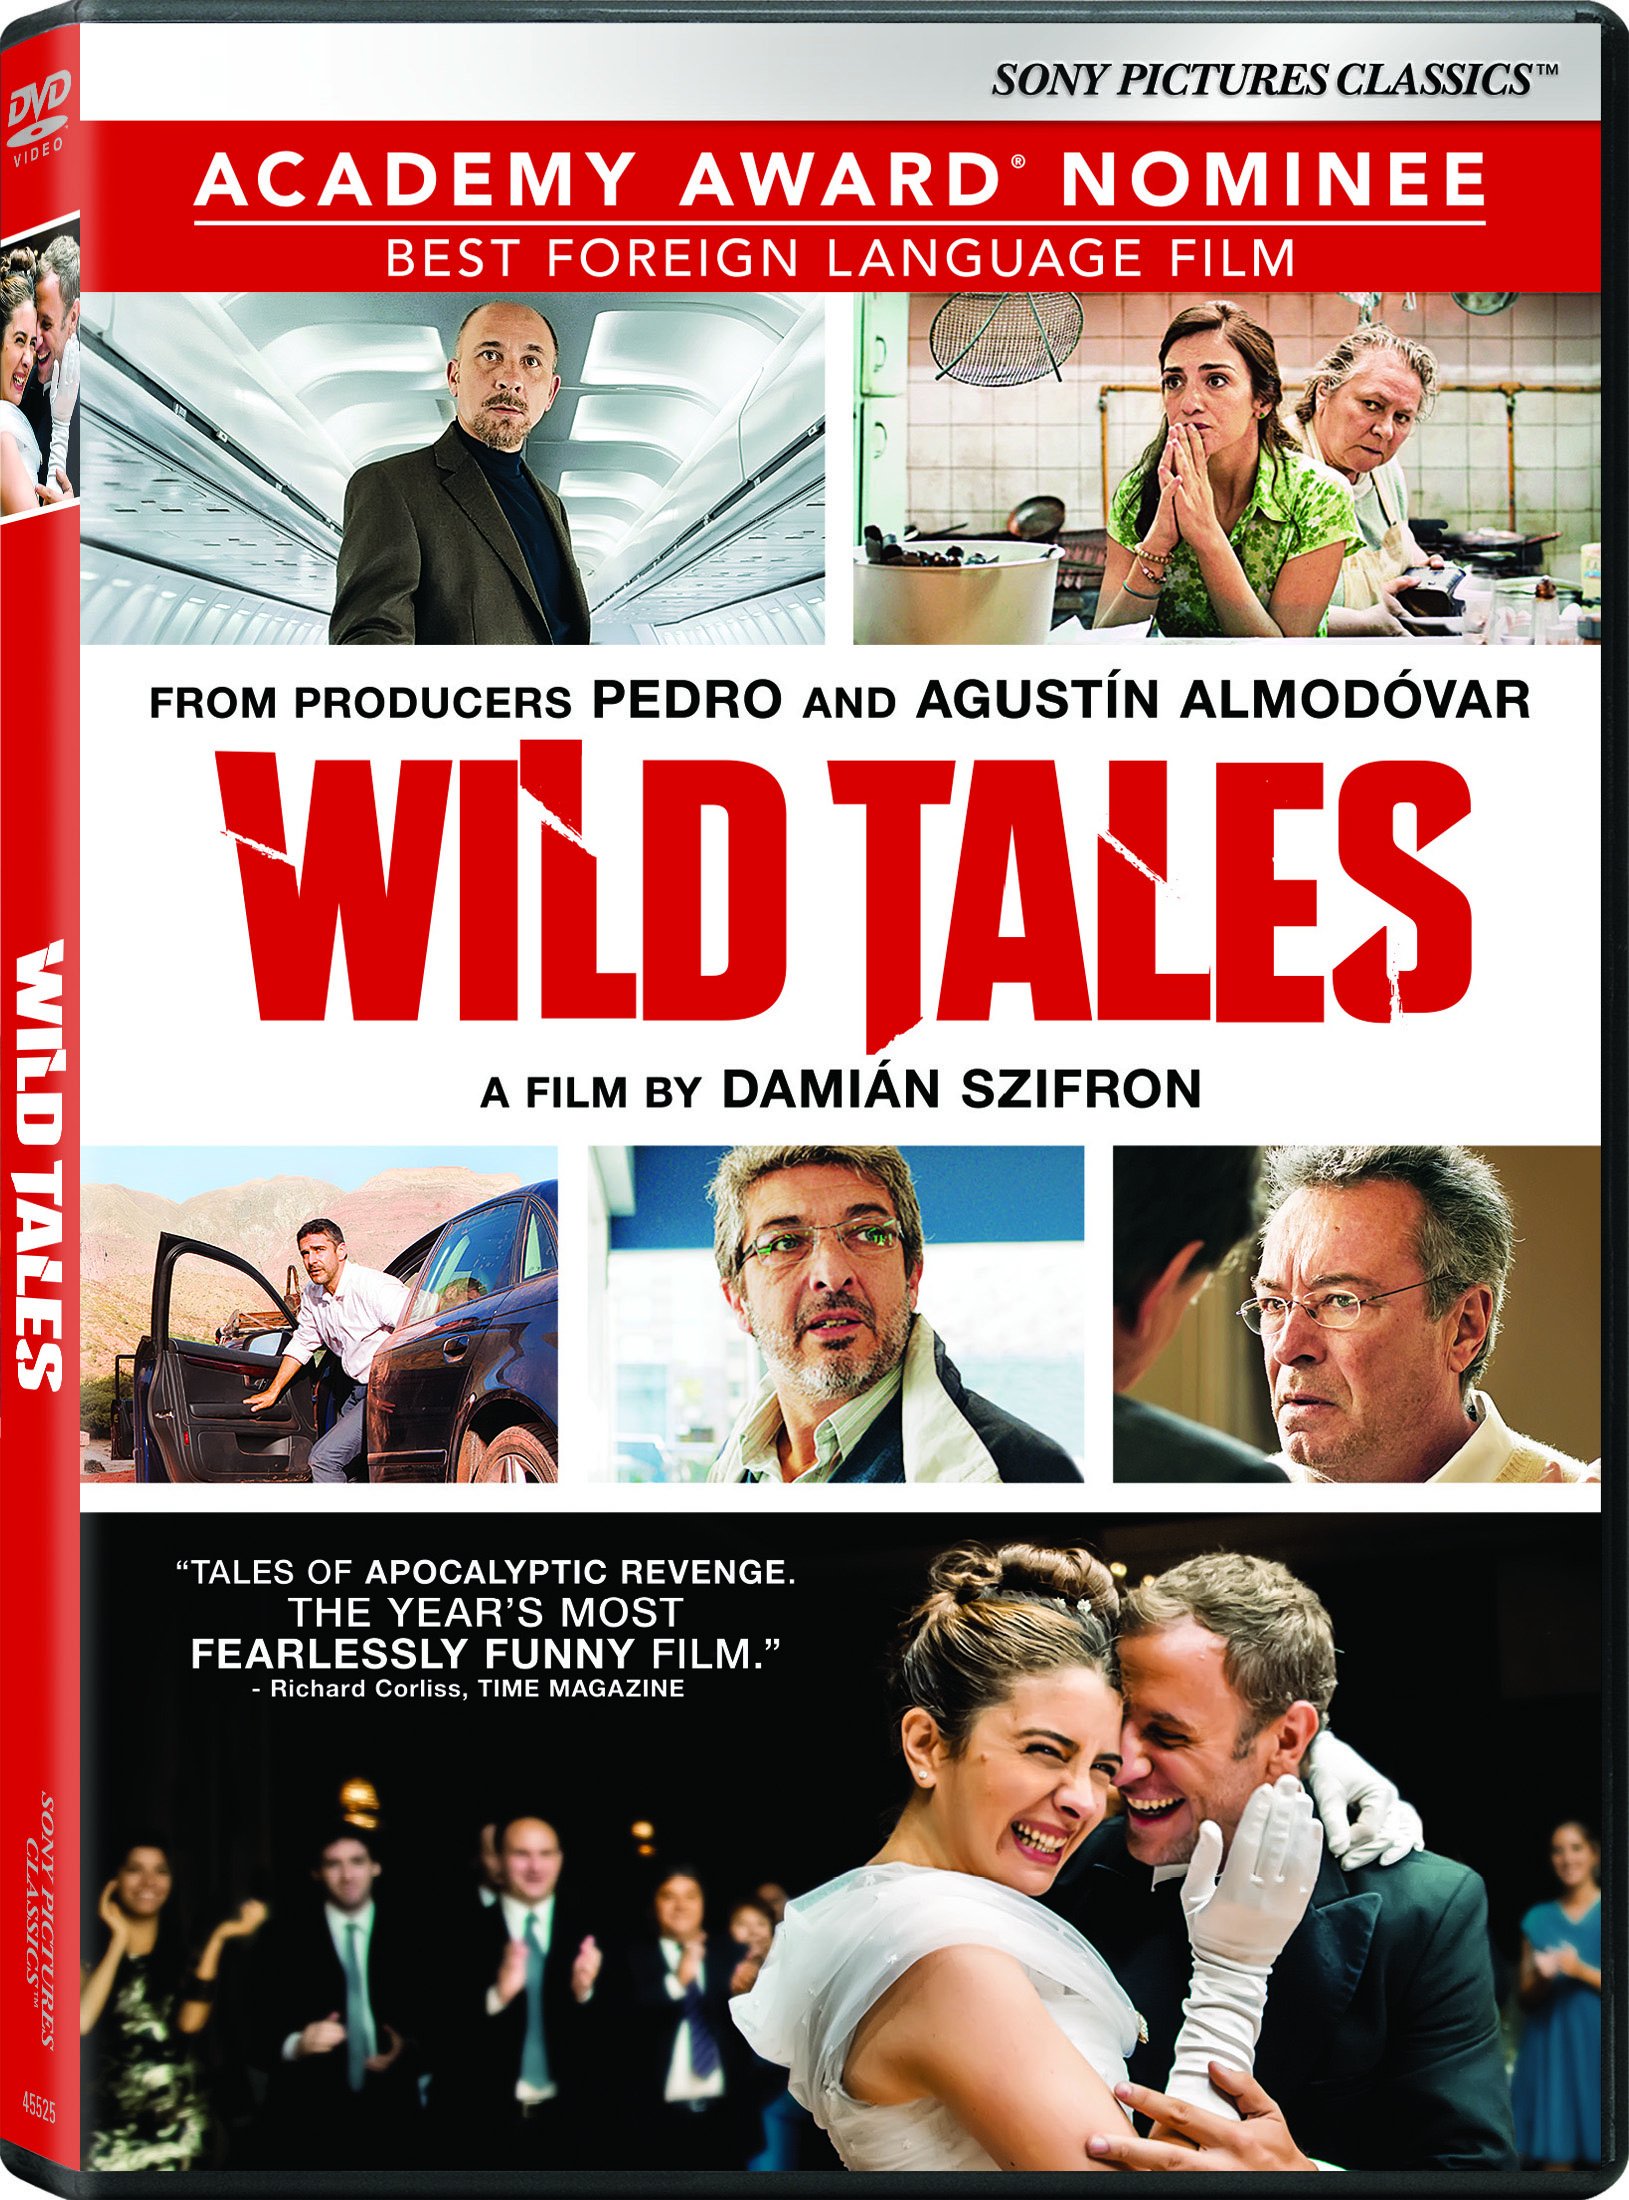 Wild Tales Full Movie : Top 10 Most Insightful Foreign Films of 2014, Part 1 ... - Watch the full movie online.